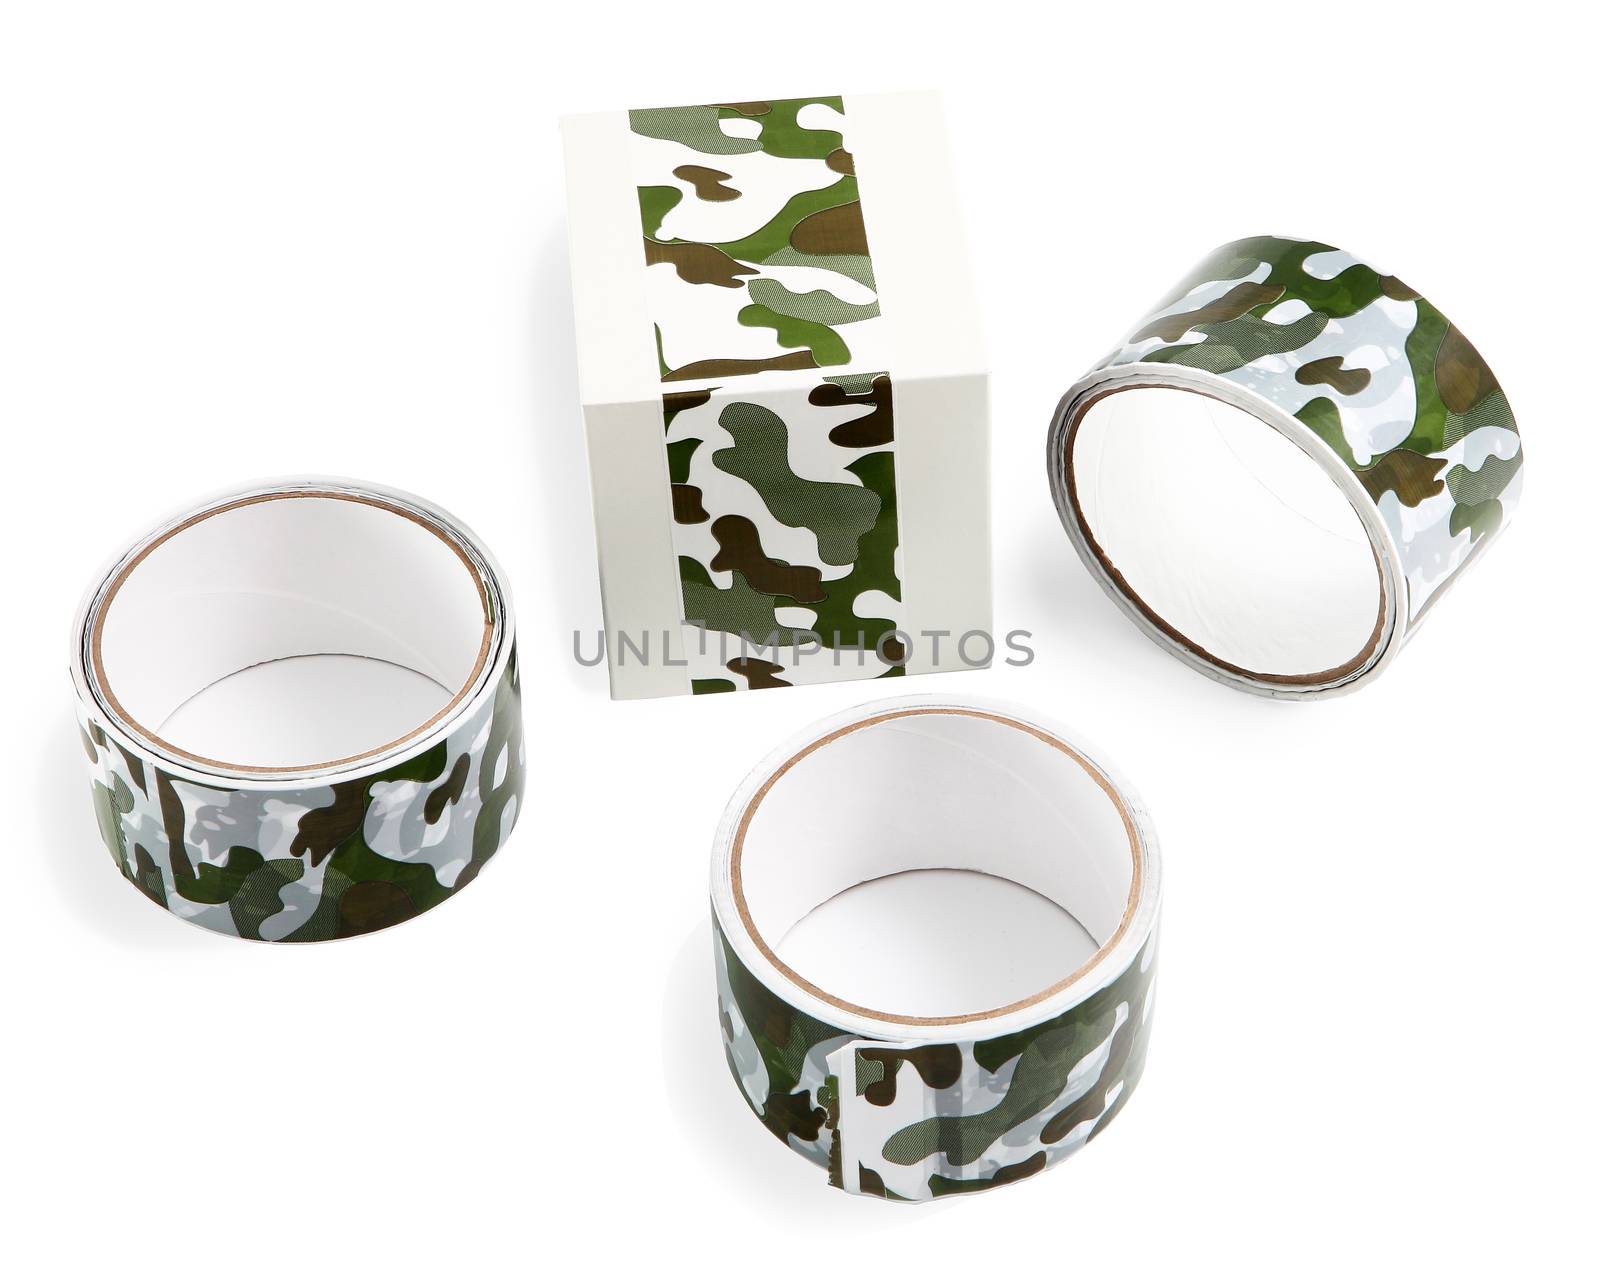 Packing tape with print. Masking tape for gift wrapping. Camouflage print on the packaging adhesive tape. Flexible packaging materials and products. by grigvovan